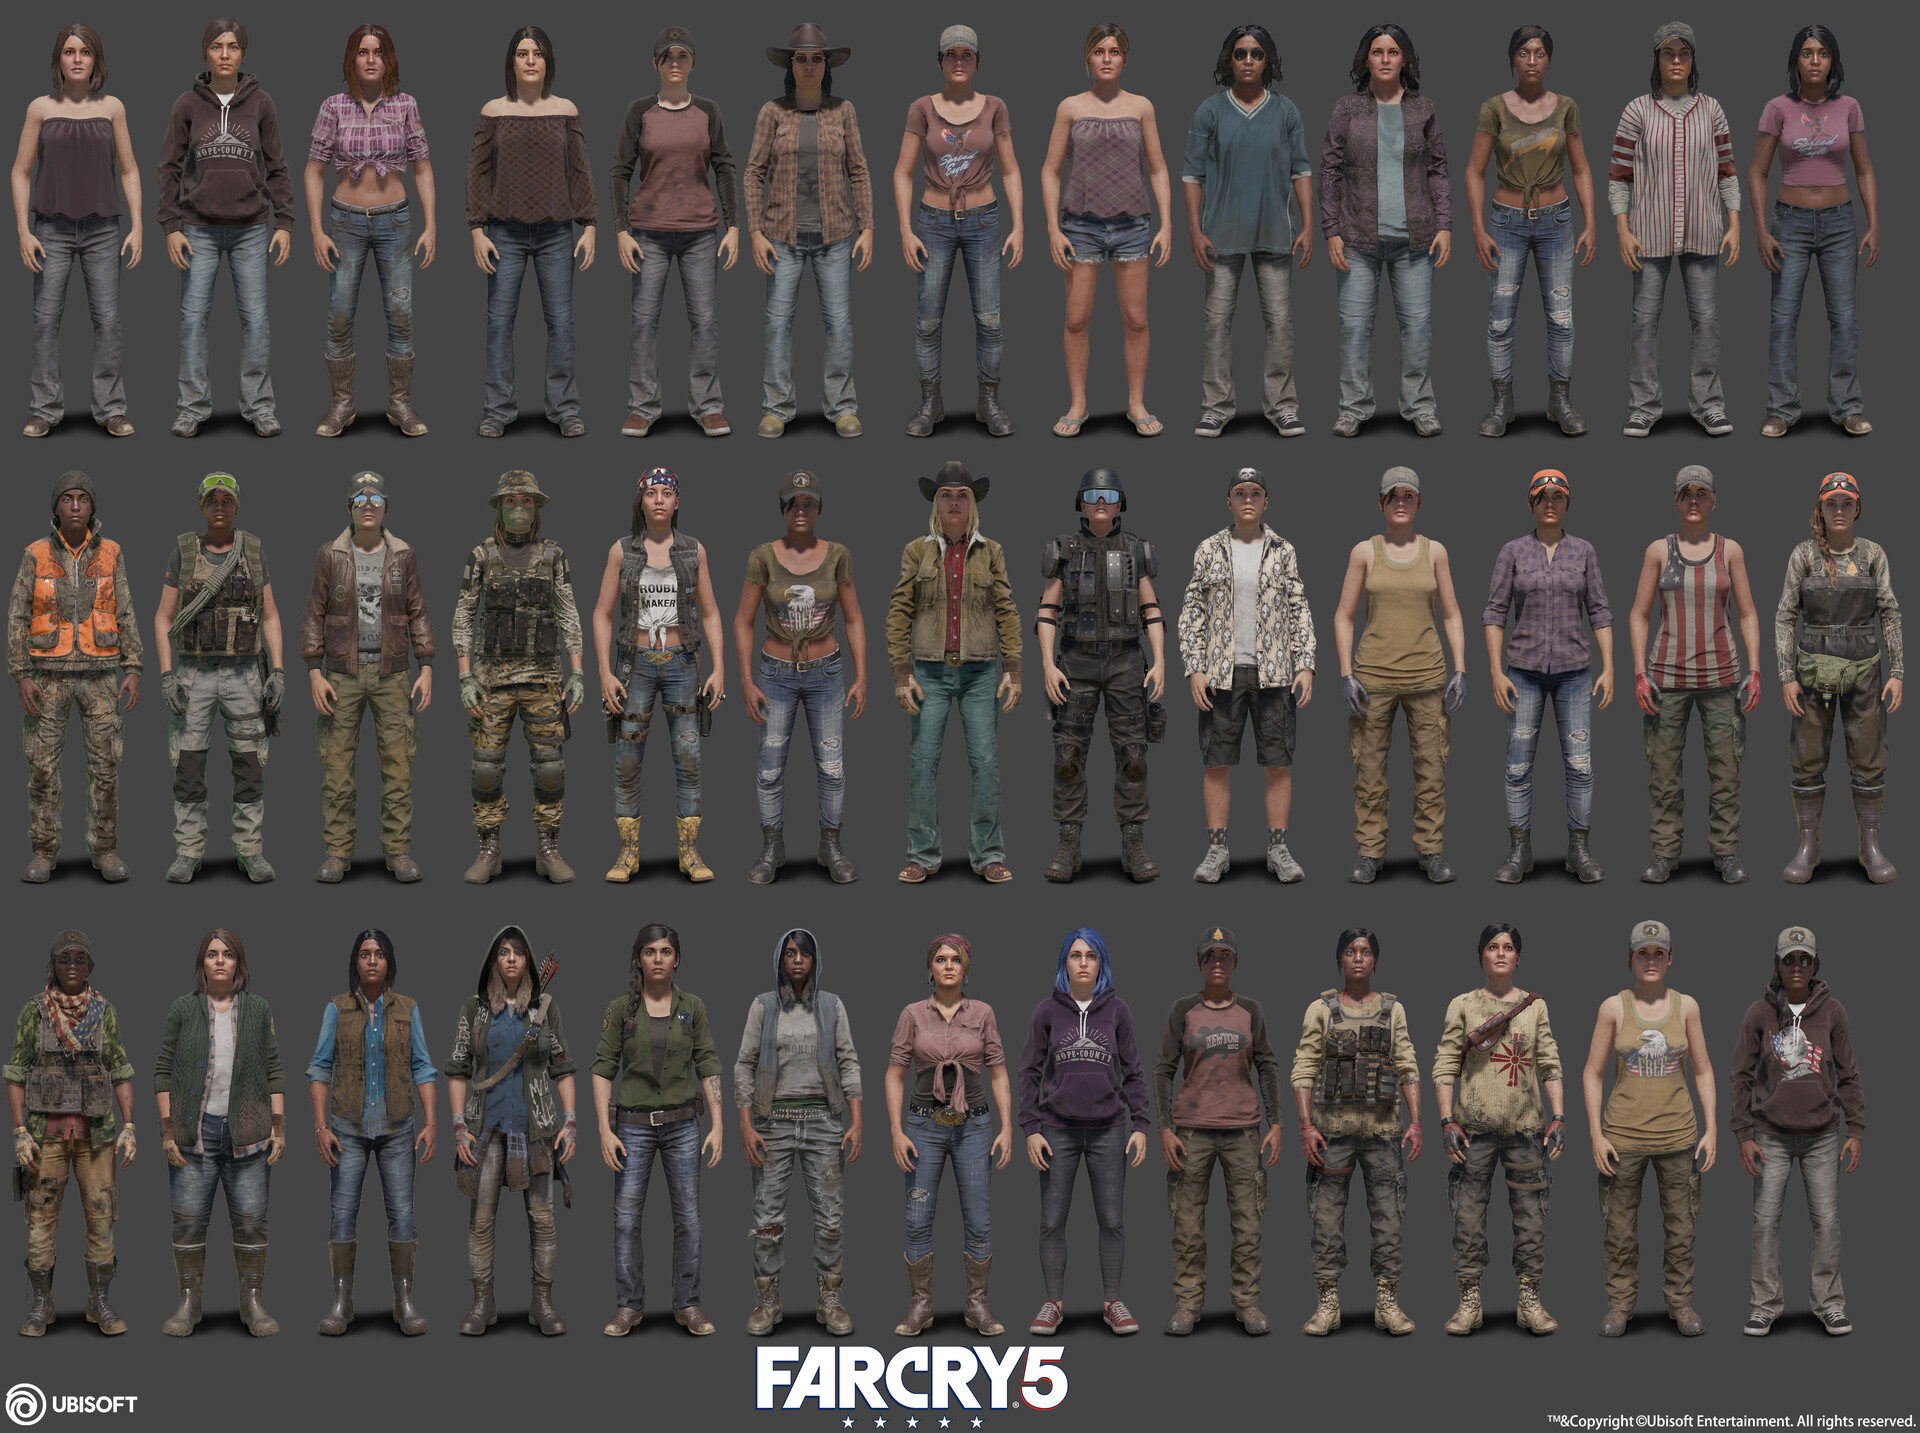 FAR CRY 5 mod outfits cultists variations from trailer\live action